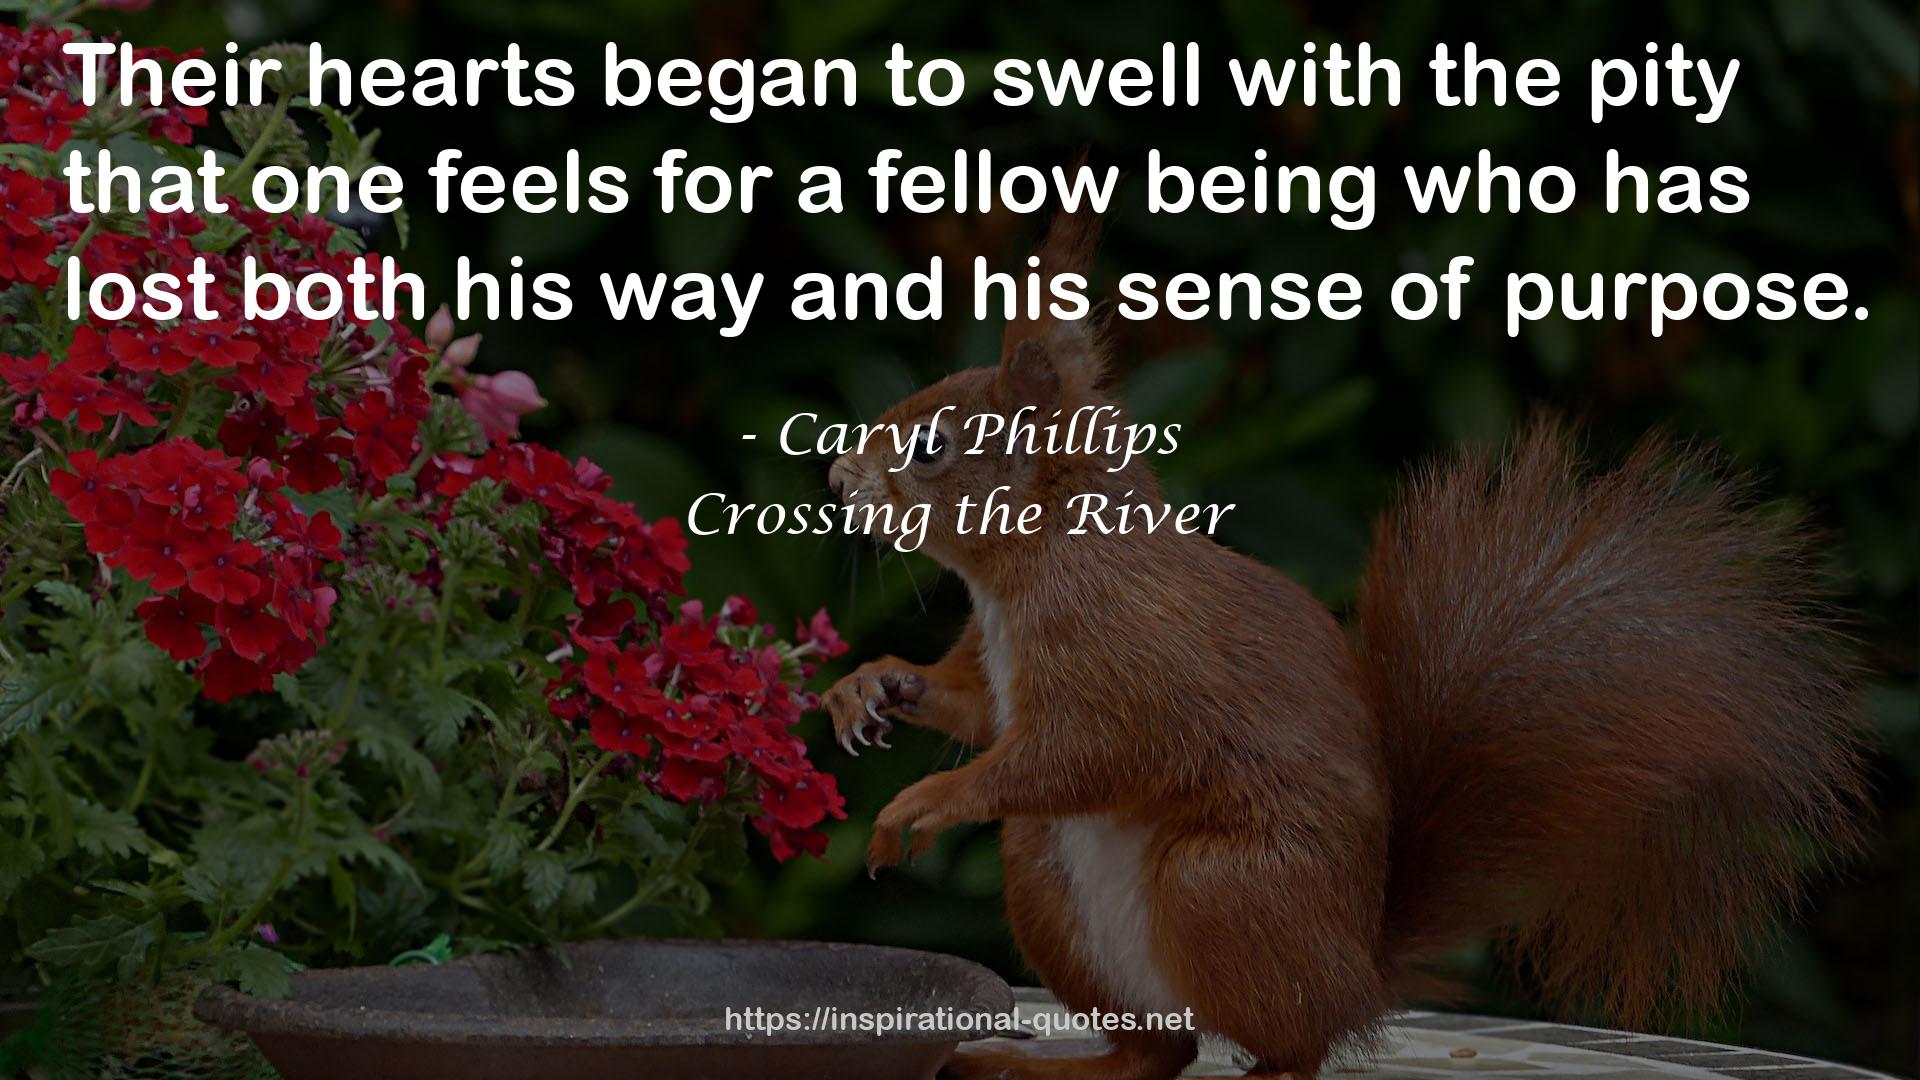 Crossing the River QUOTES